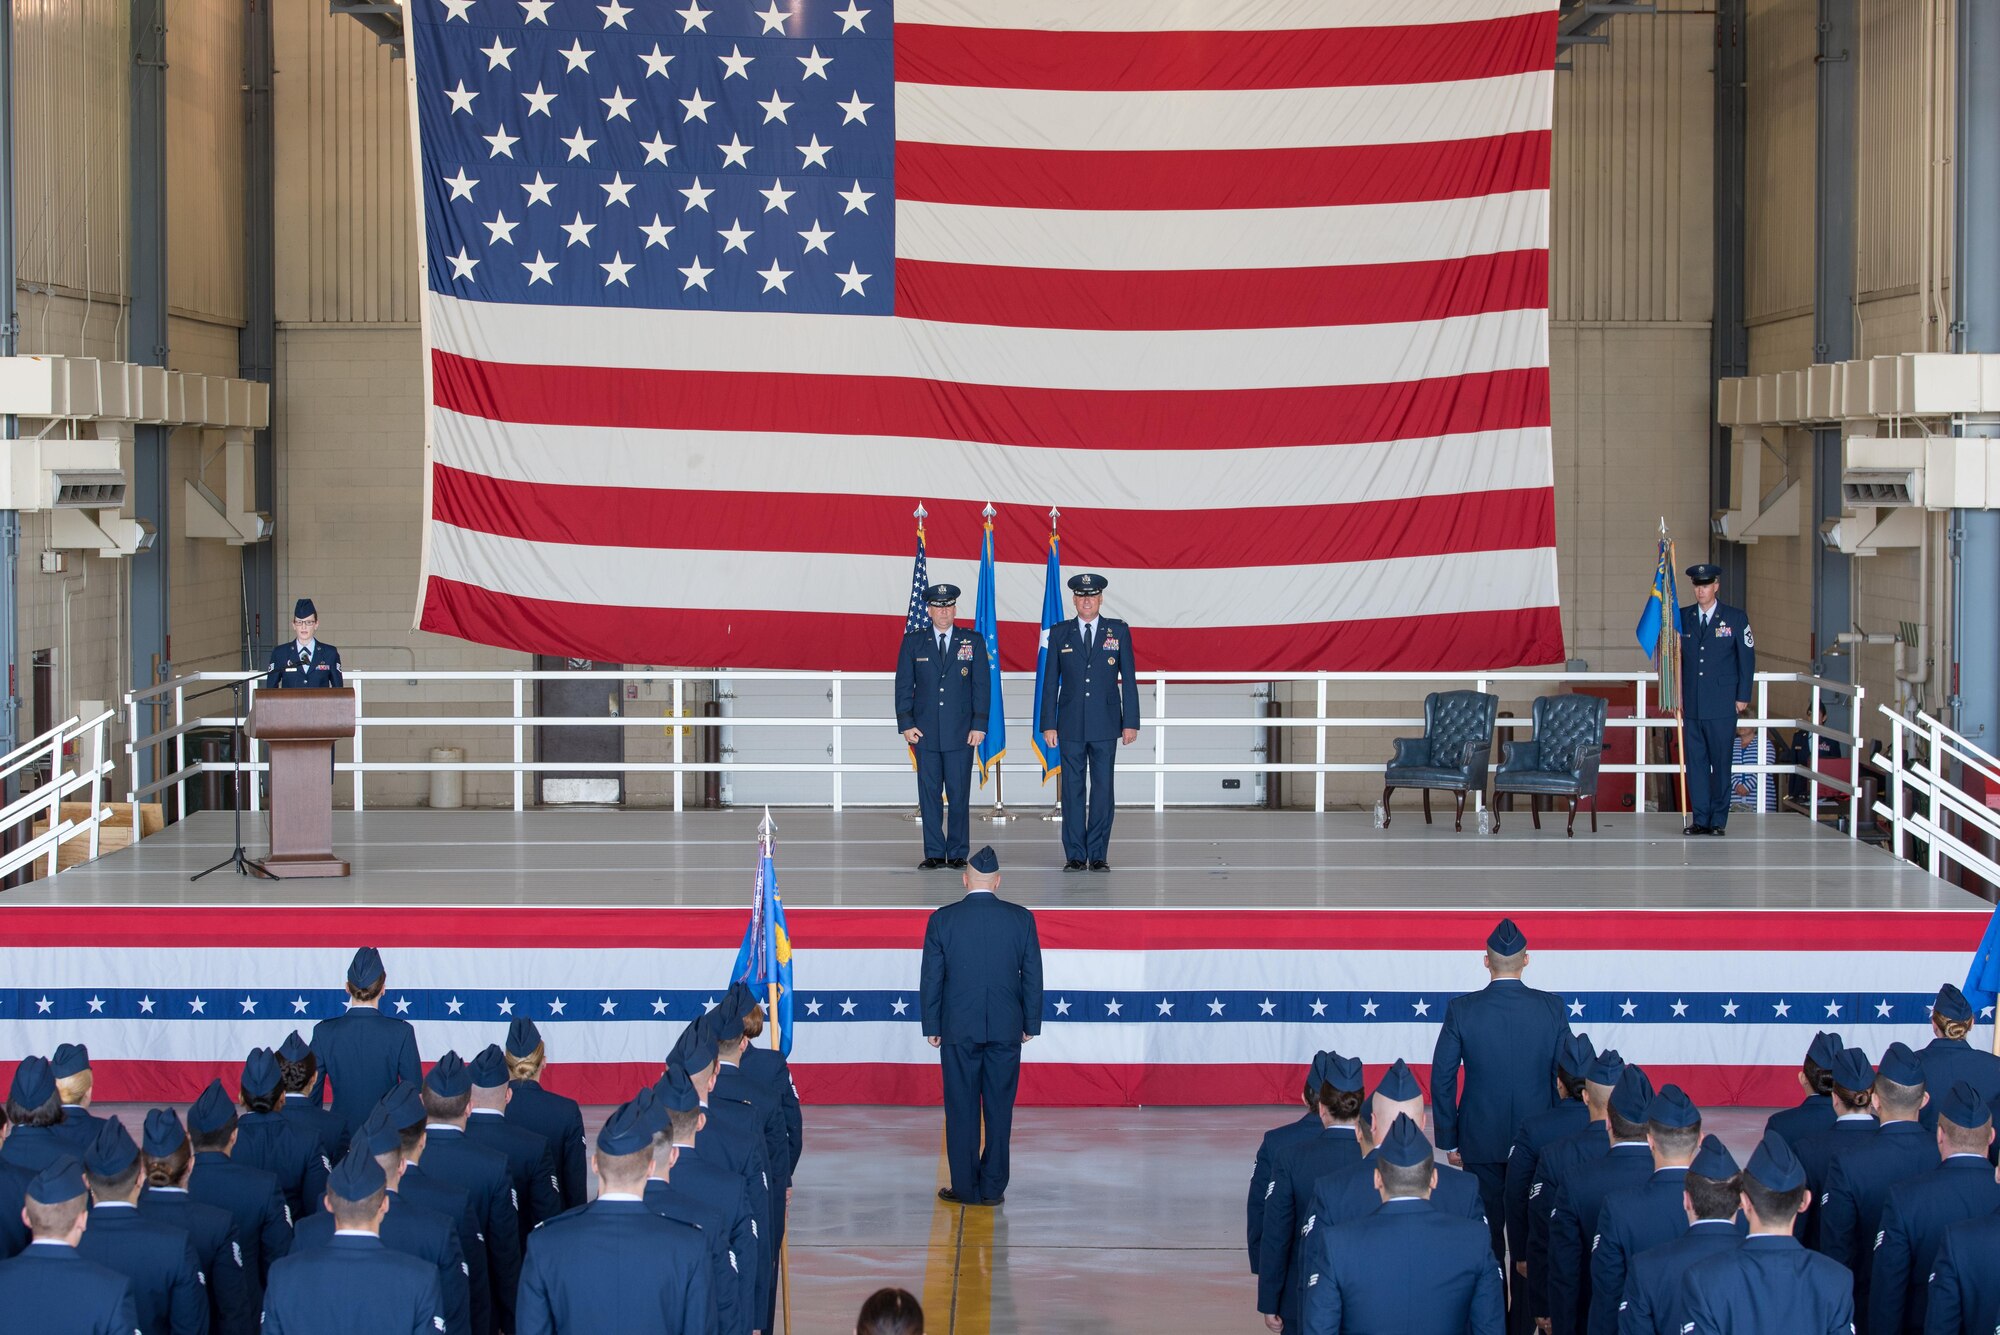 Maj. Gen. Christopher Bence, the United States Air Force Expeditionary Center commander, left, presents Col. Benjamin Spencer, right, to the members of the 319th Air Base Wing as their new wing commander during an Assumption of Command ceremony held June 6, 2017, at Grand Forks AFB, N.D. This will be Spencer’s first wing-level command experience. (U.S. Air Force photo by Master Sgt. Eric Amidon)